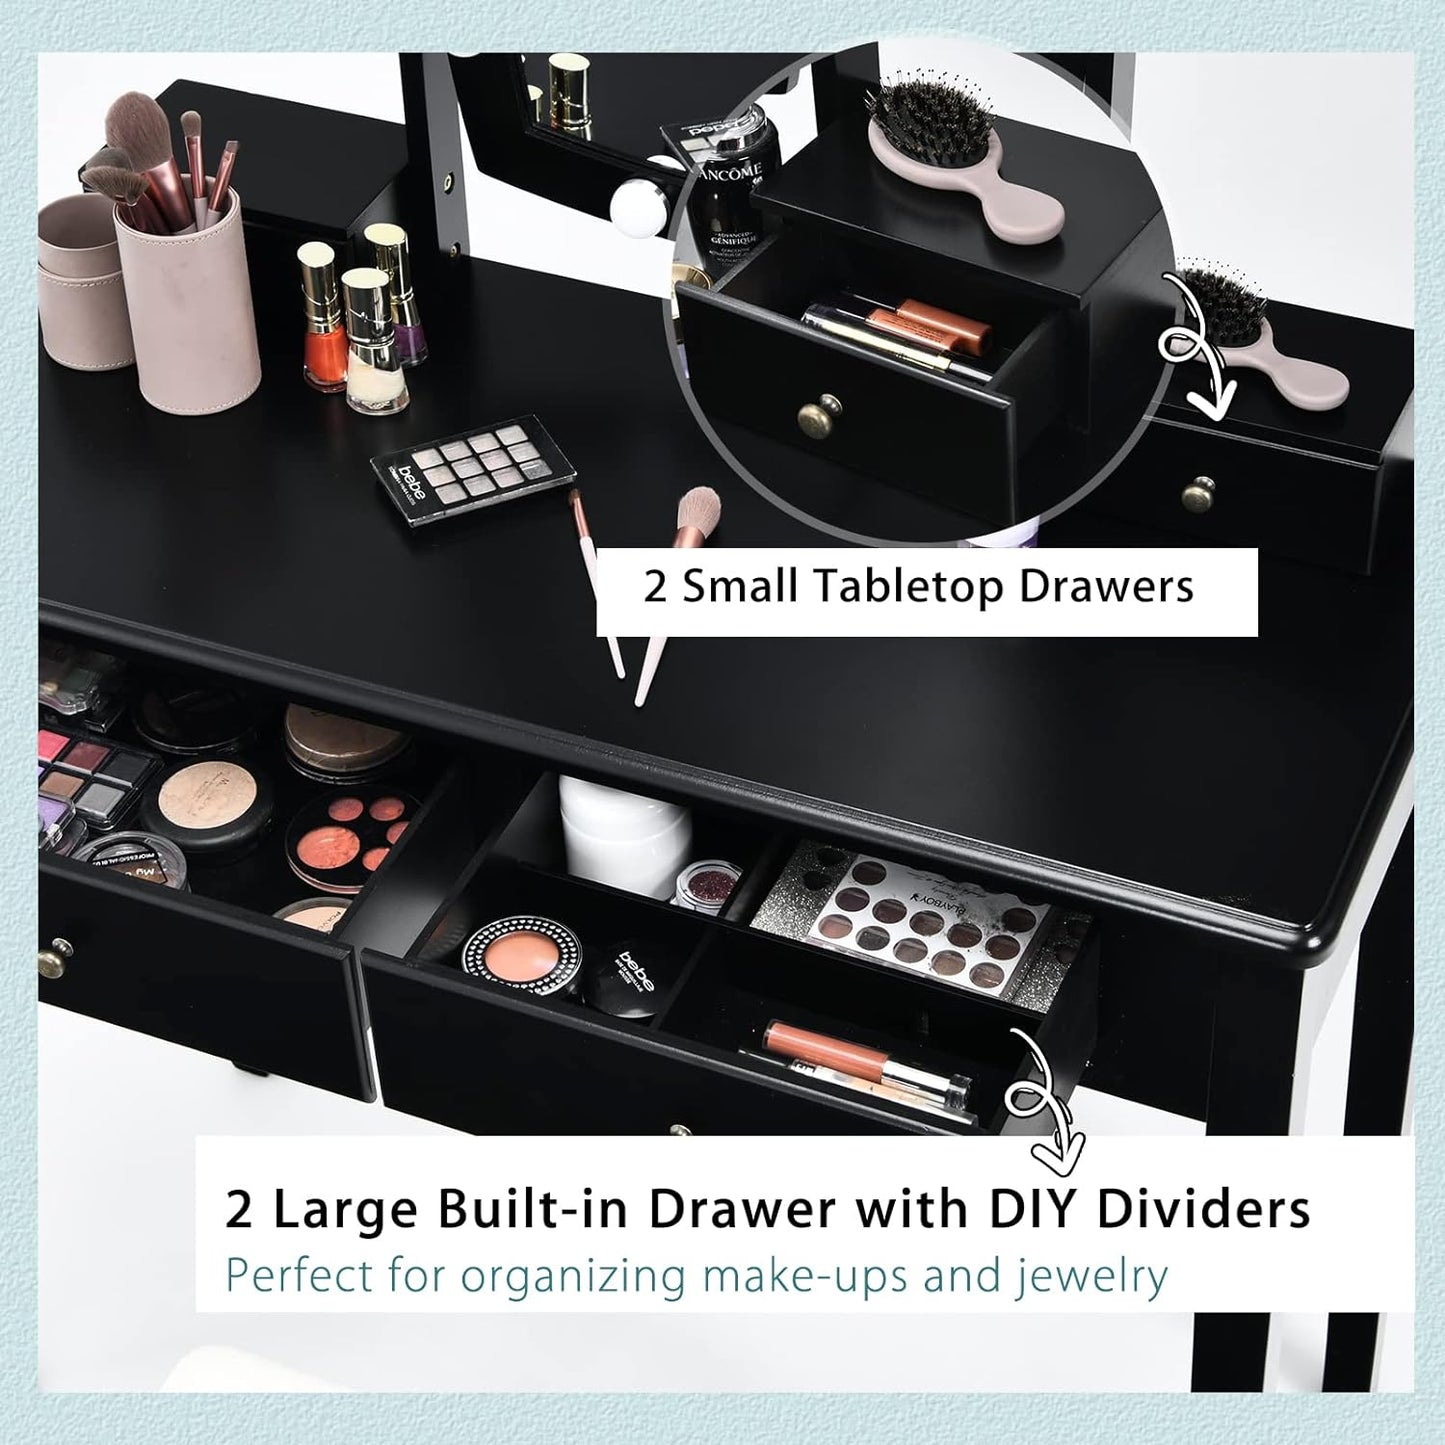 Professional title: "Modern Vanity Table Set with Lighted Mirror, Adjustable Brightness, Ample Storage, and Cushioned Stool - Ideal for Bedroom Makeup and Dressing - Black"